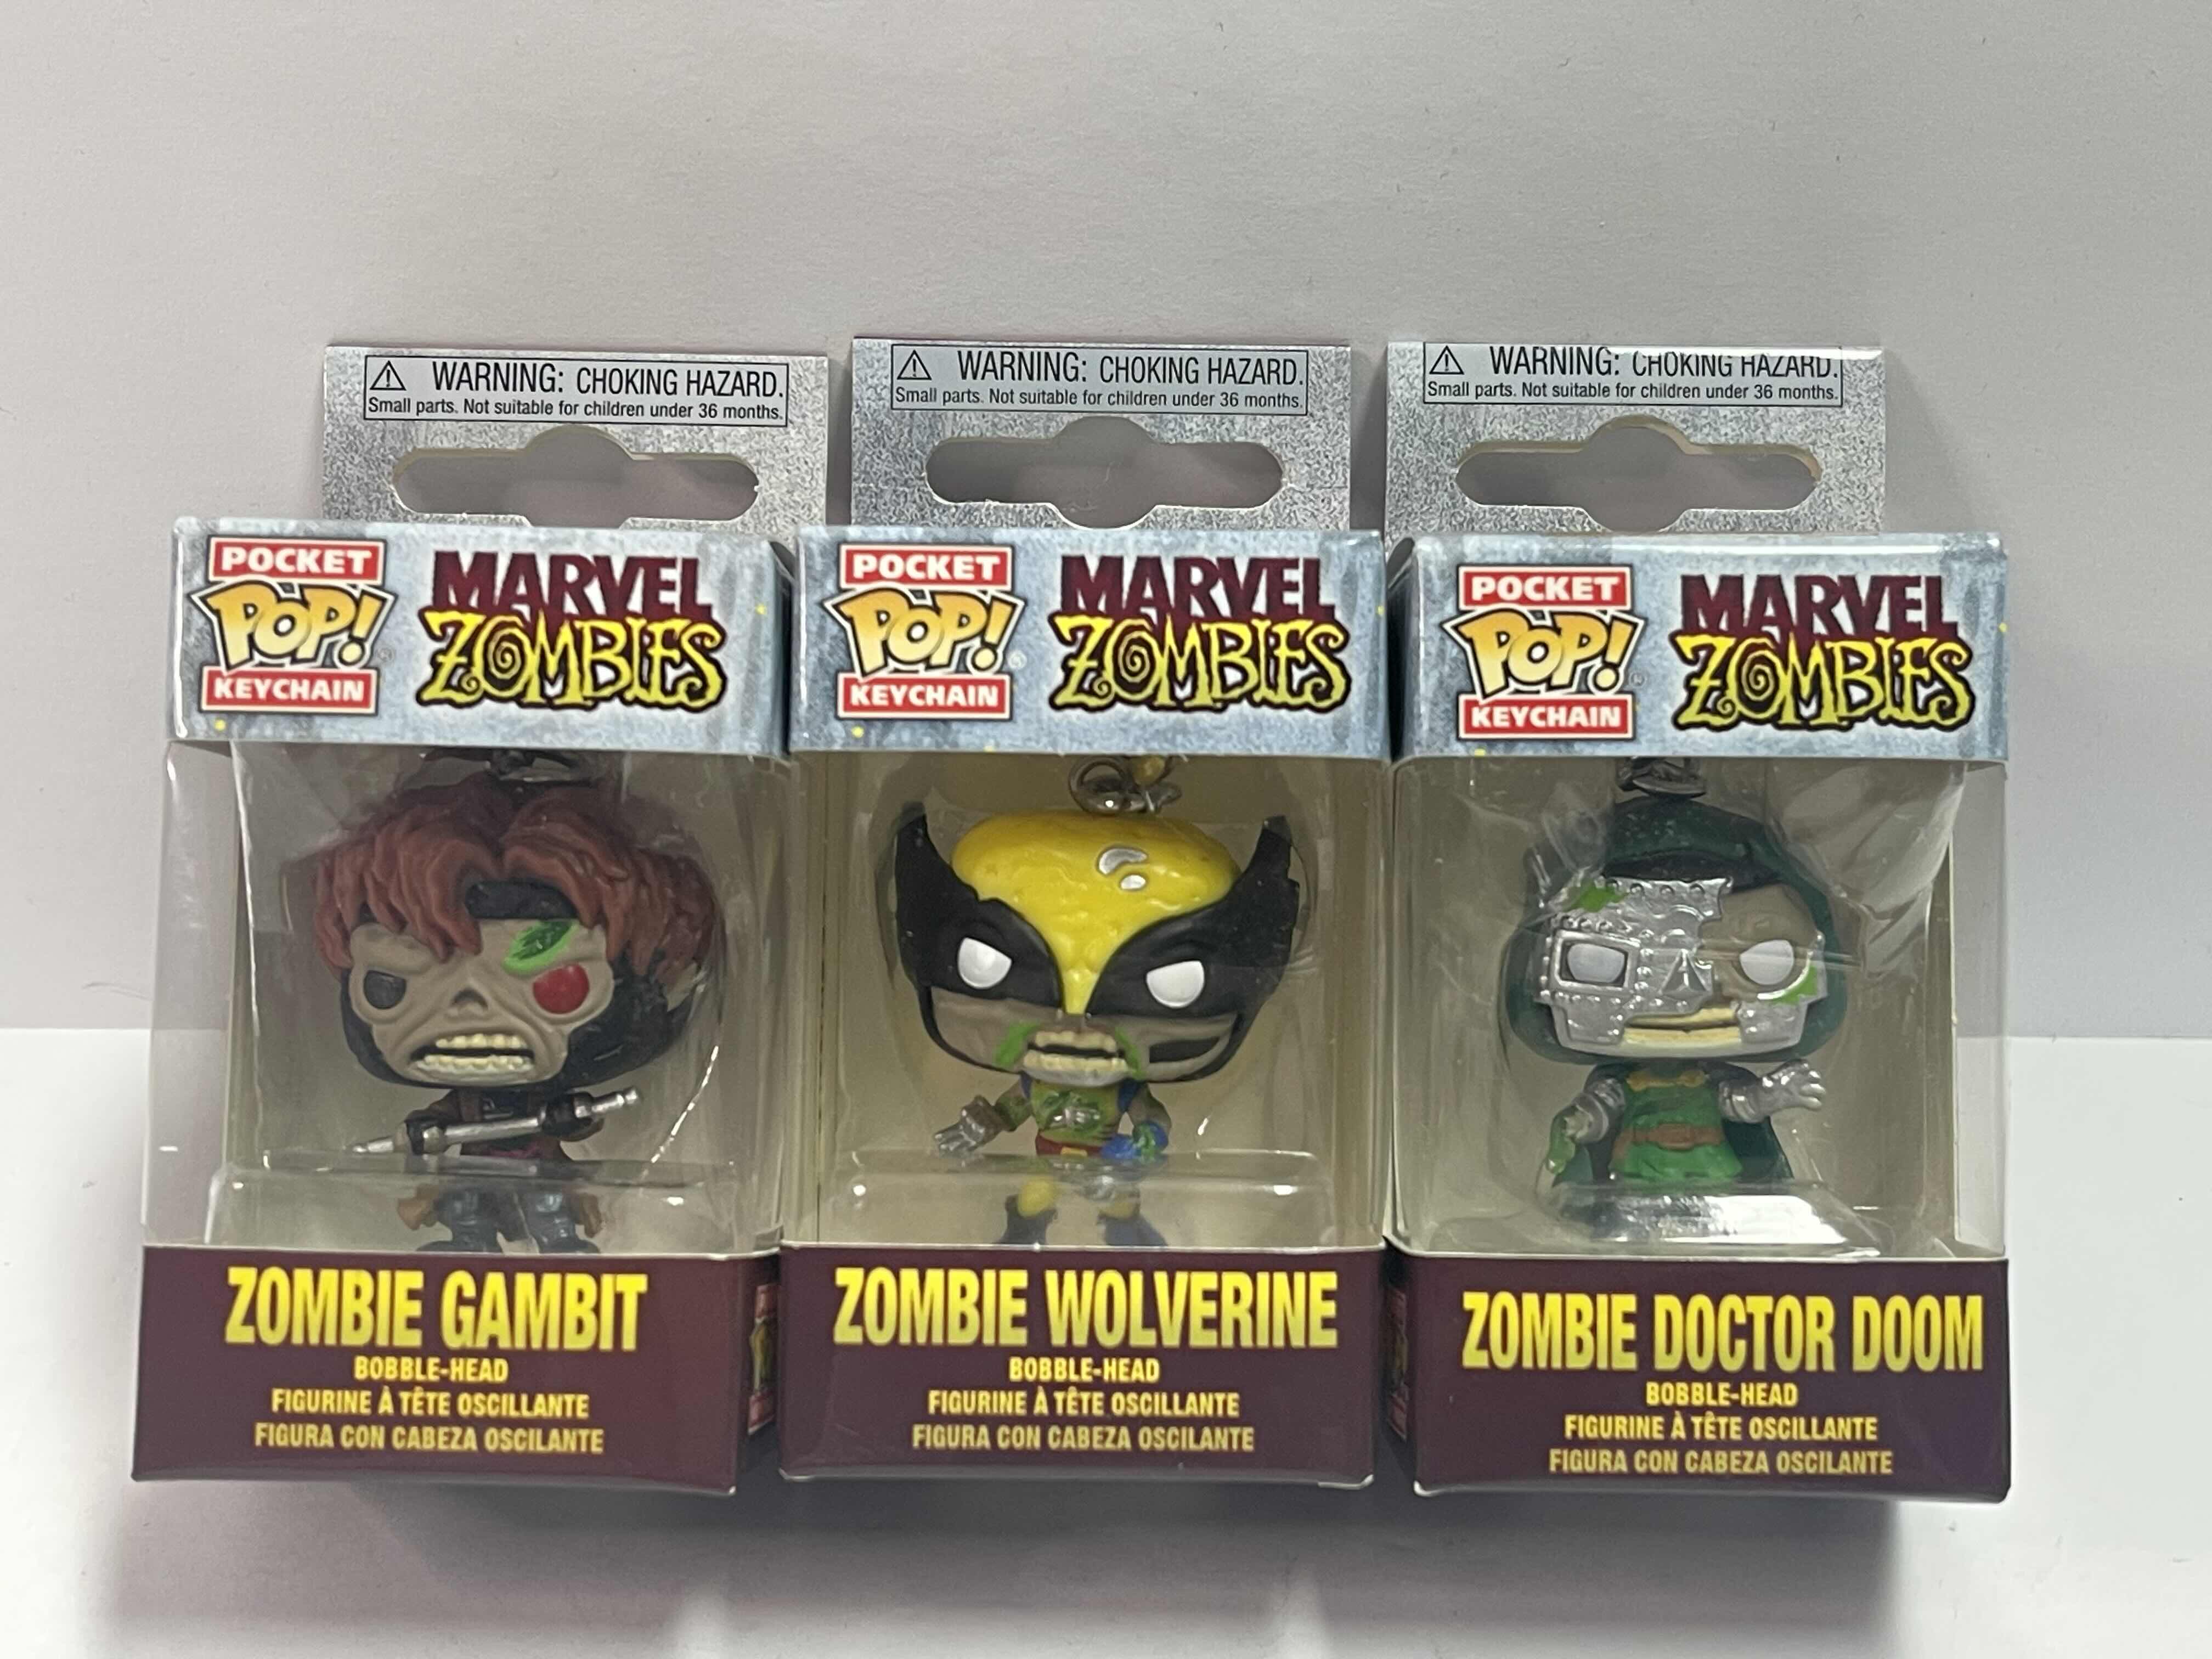 Photo 1 of NEW 3 POCKET POP KEYCHAINS “MARVEL ZOMBIES “ - ZOMBIE WOLVERINE , DR DOOM & GAMBIT - TOTAL RETAIL PRICE $ 32.00